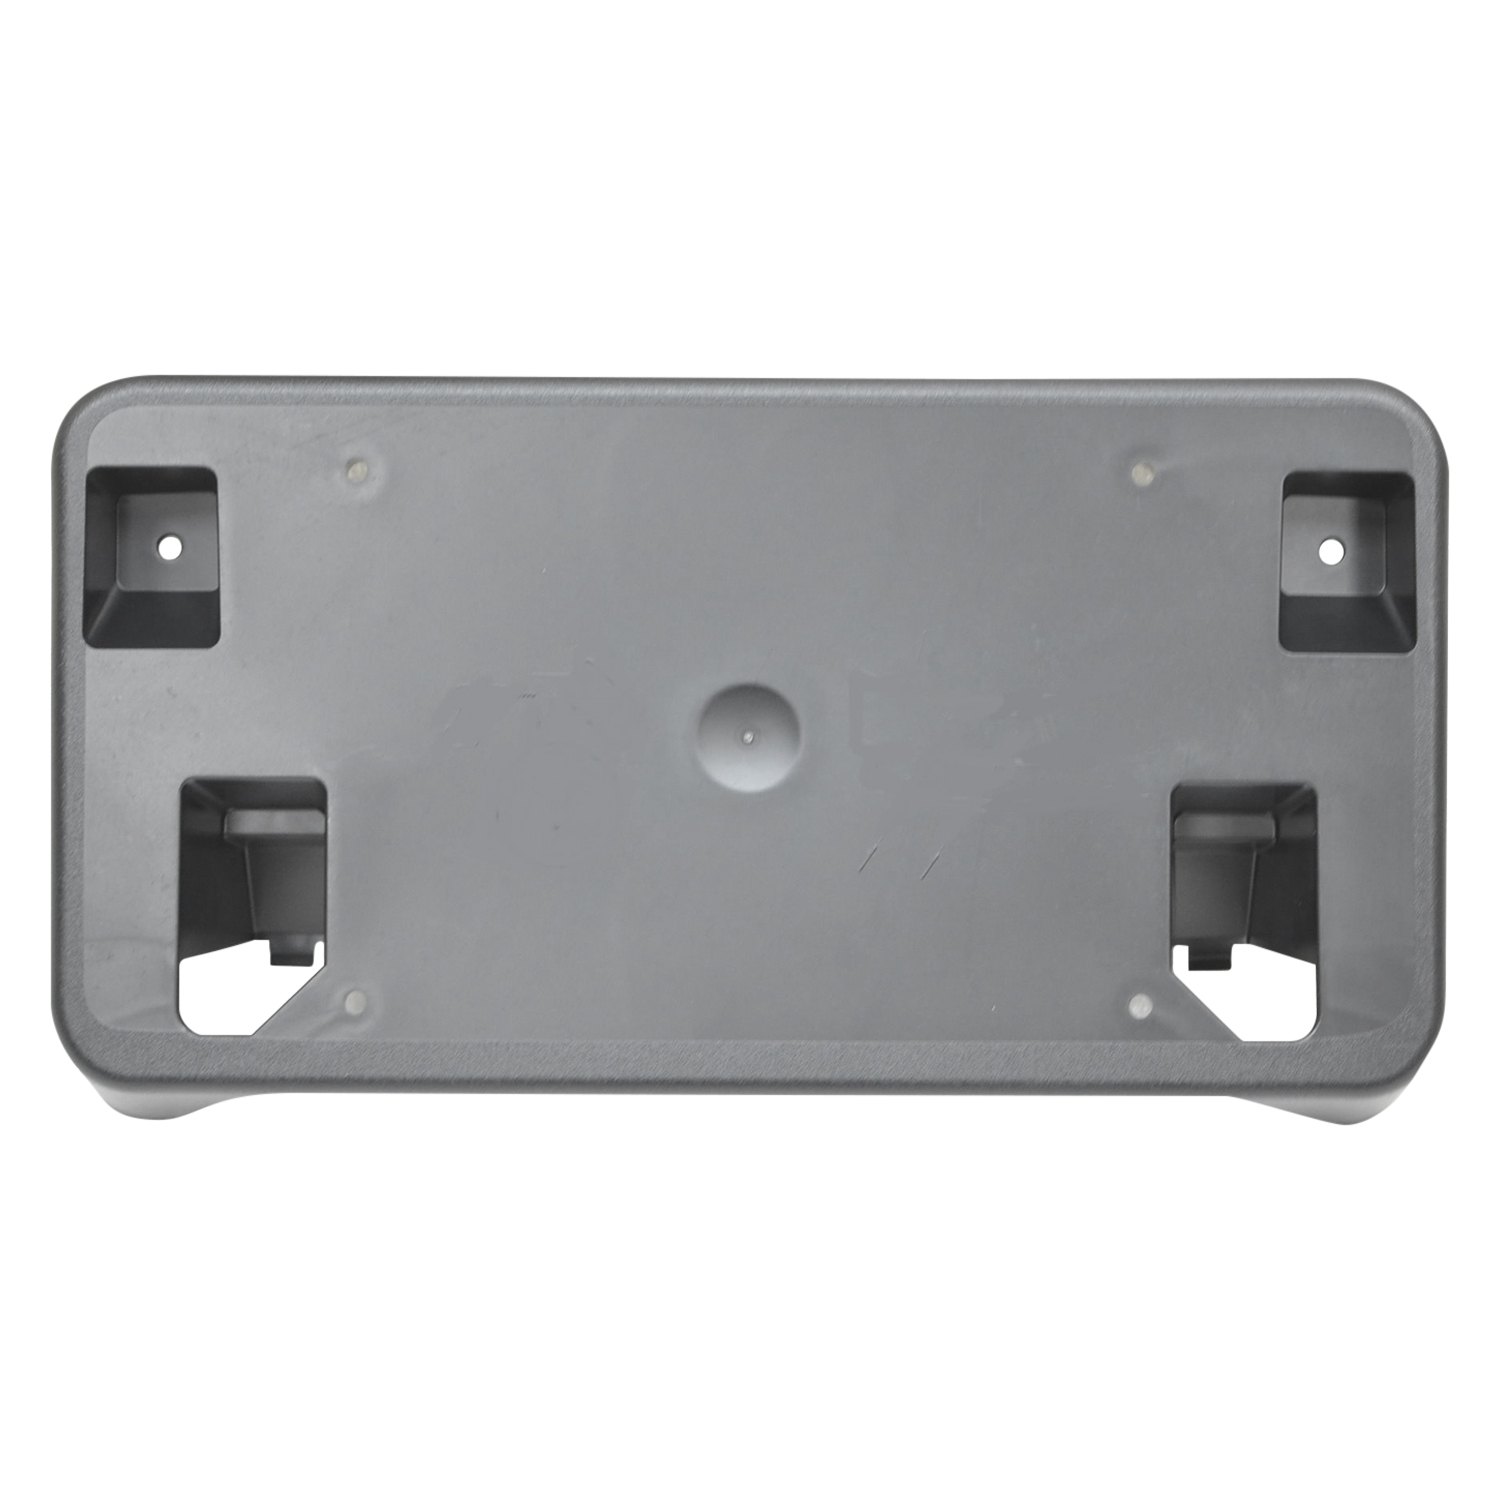 2019 Chevy Traverse Front License Plate Bracket